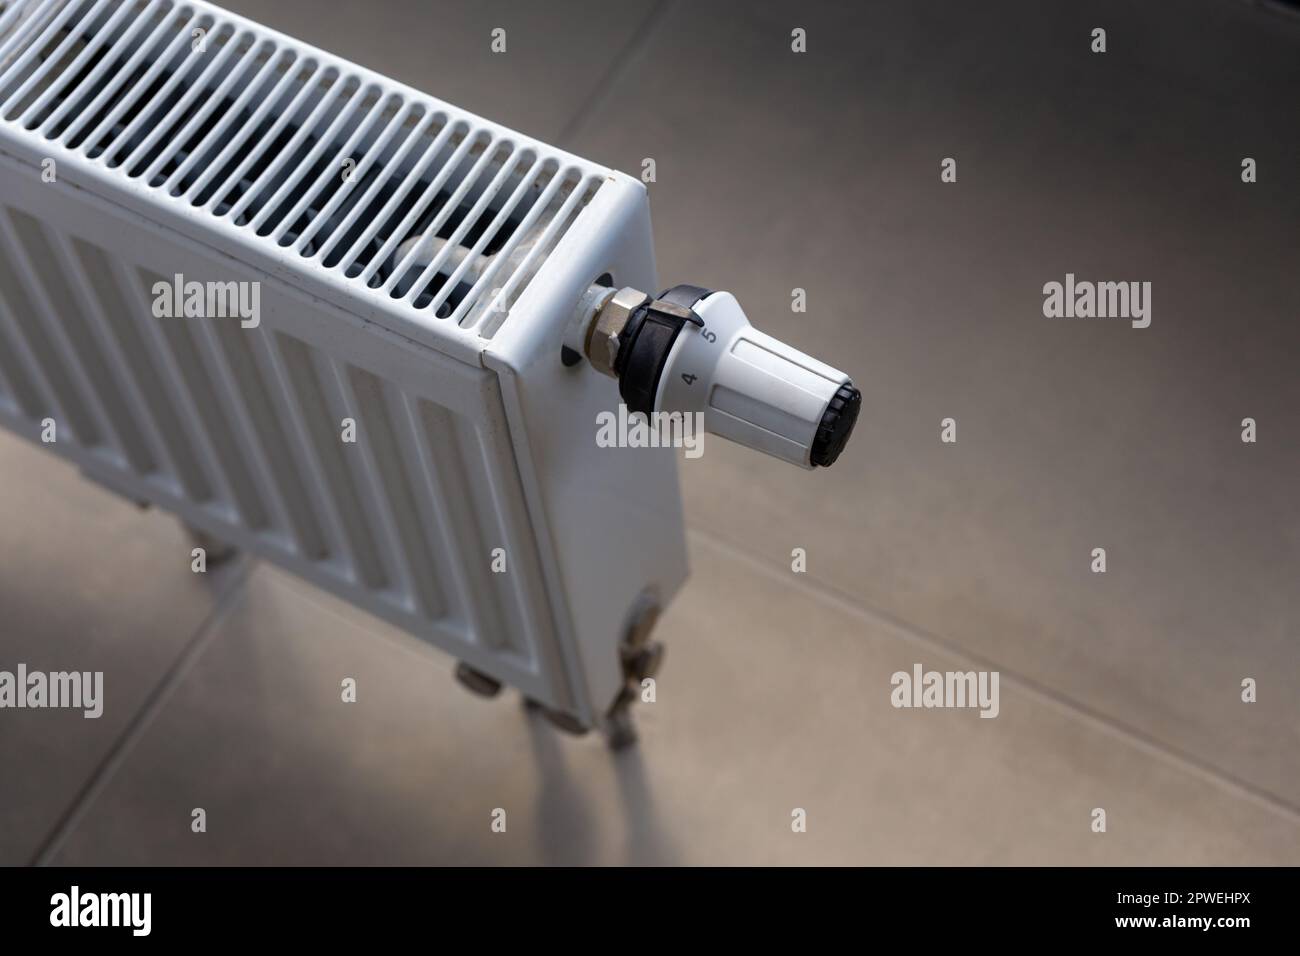 Close-up of white central heating floor radiator with a power regulator in the maximum position. Stock Photo